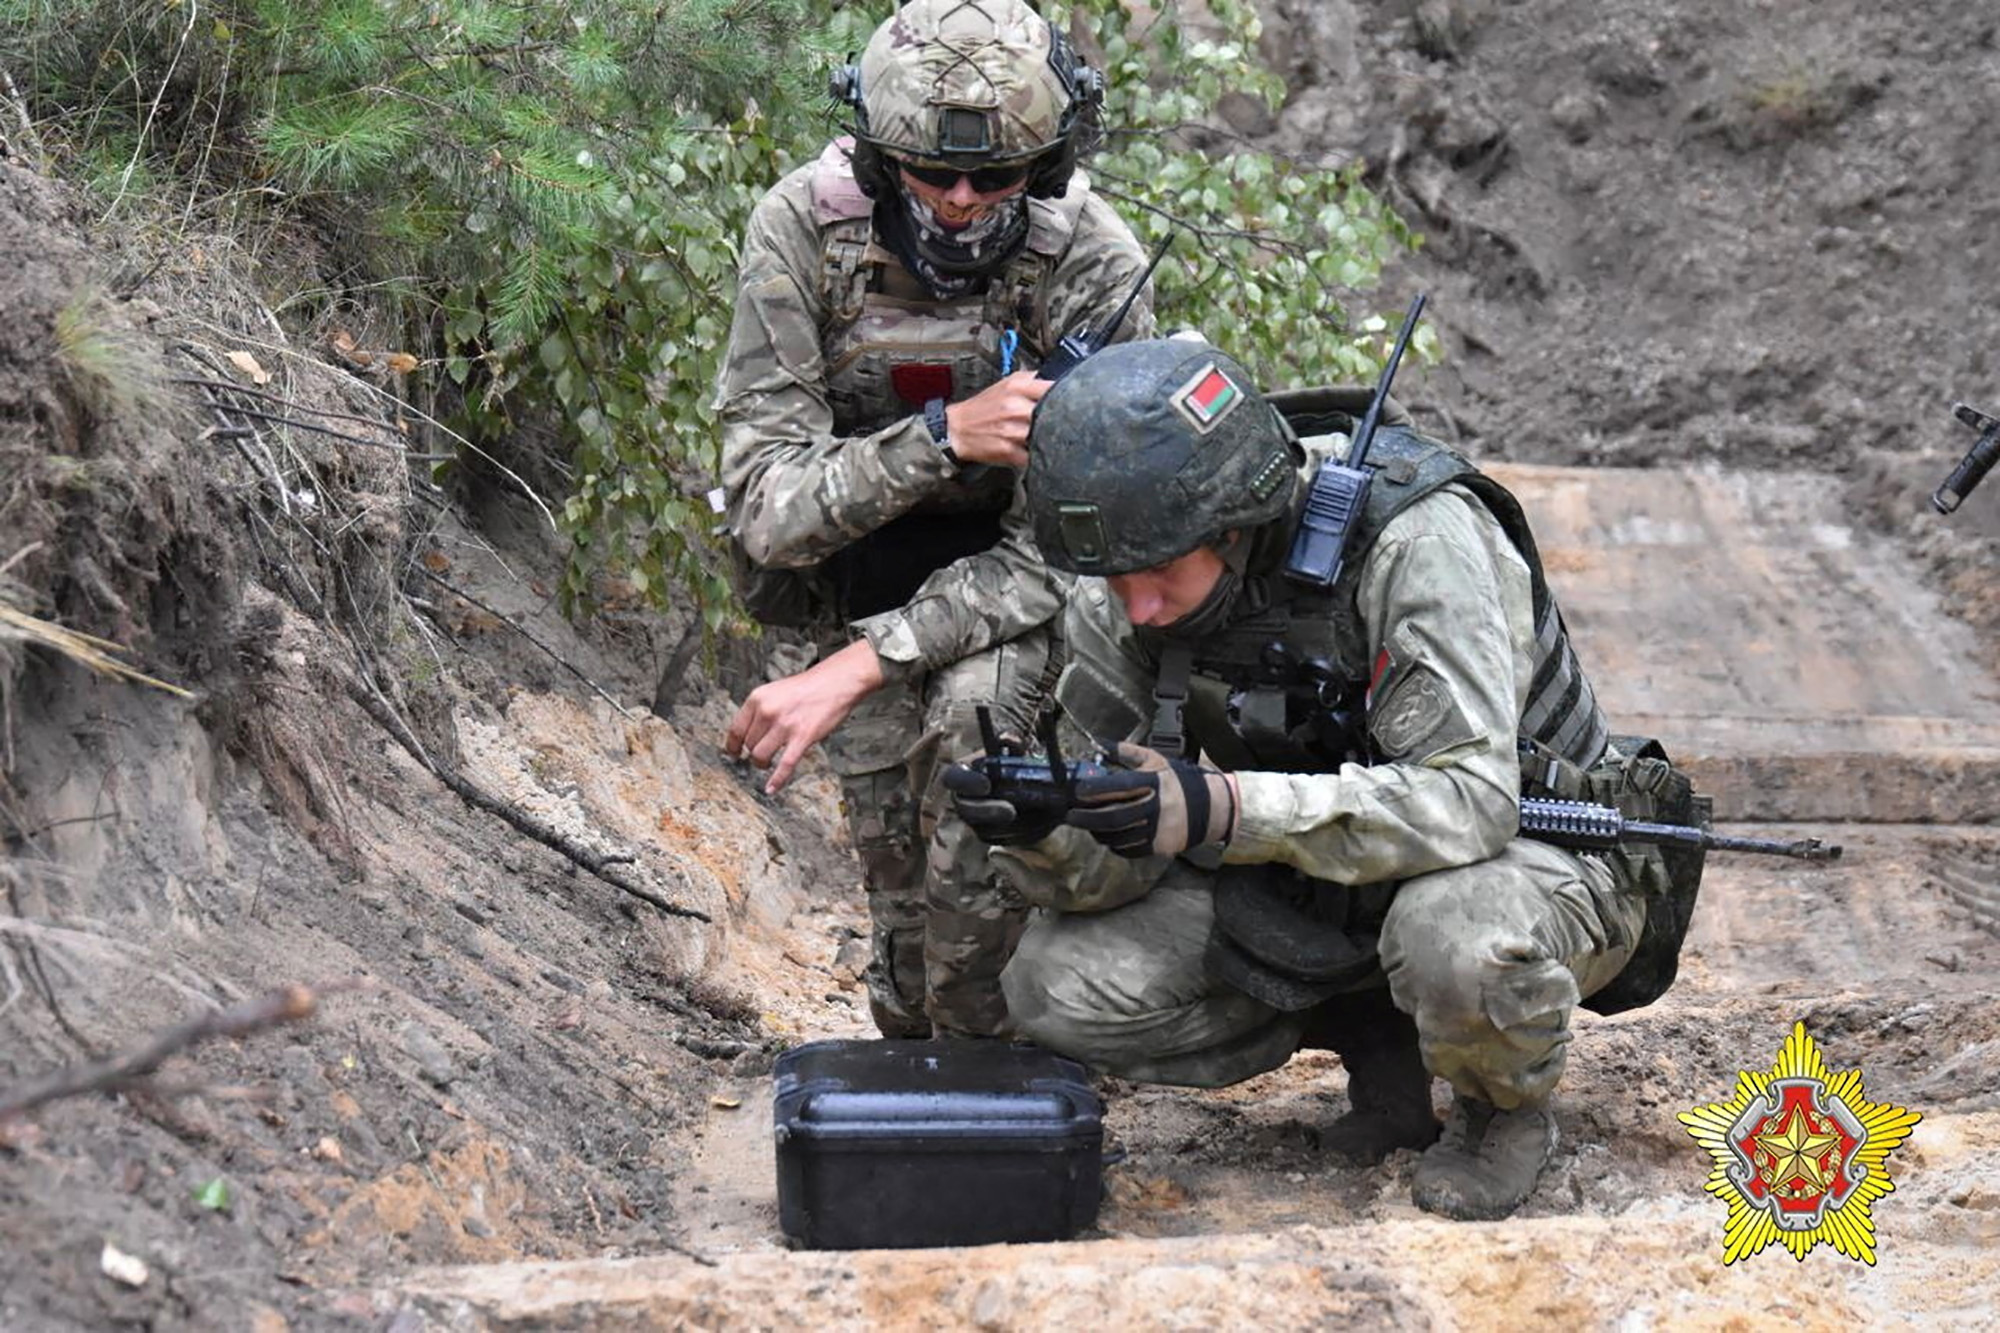 A fighter from Russian Wagner mercenary group and a Belarusian service member take part in a joint training at the Brest military range outside Brest, Belarus, in this still image from a video released on July 20.